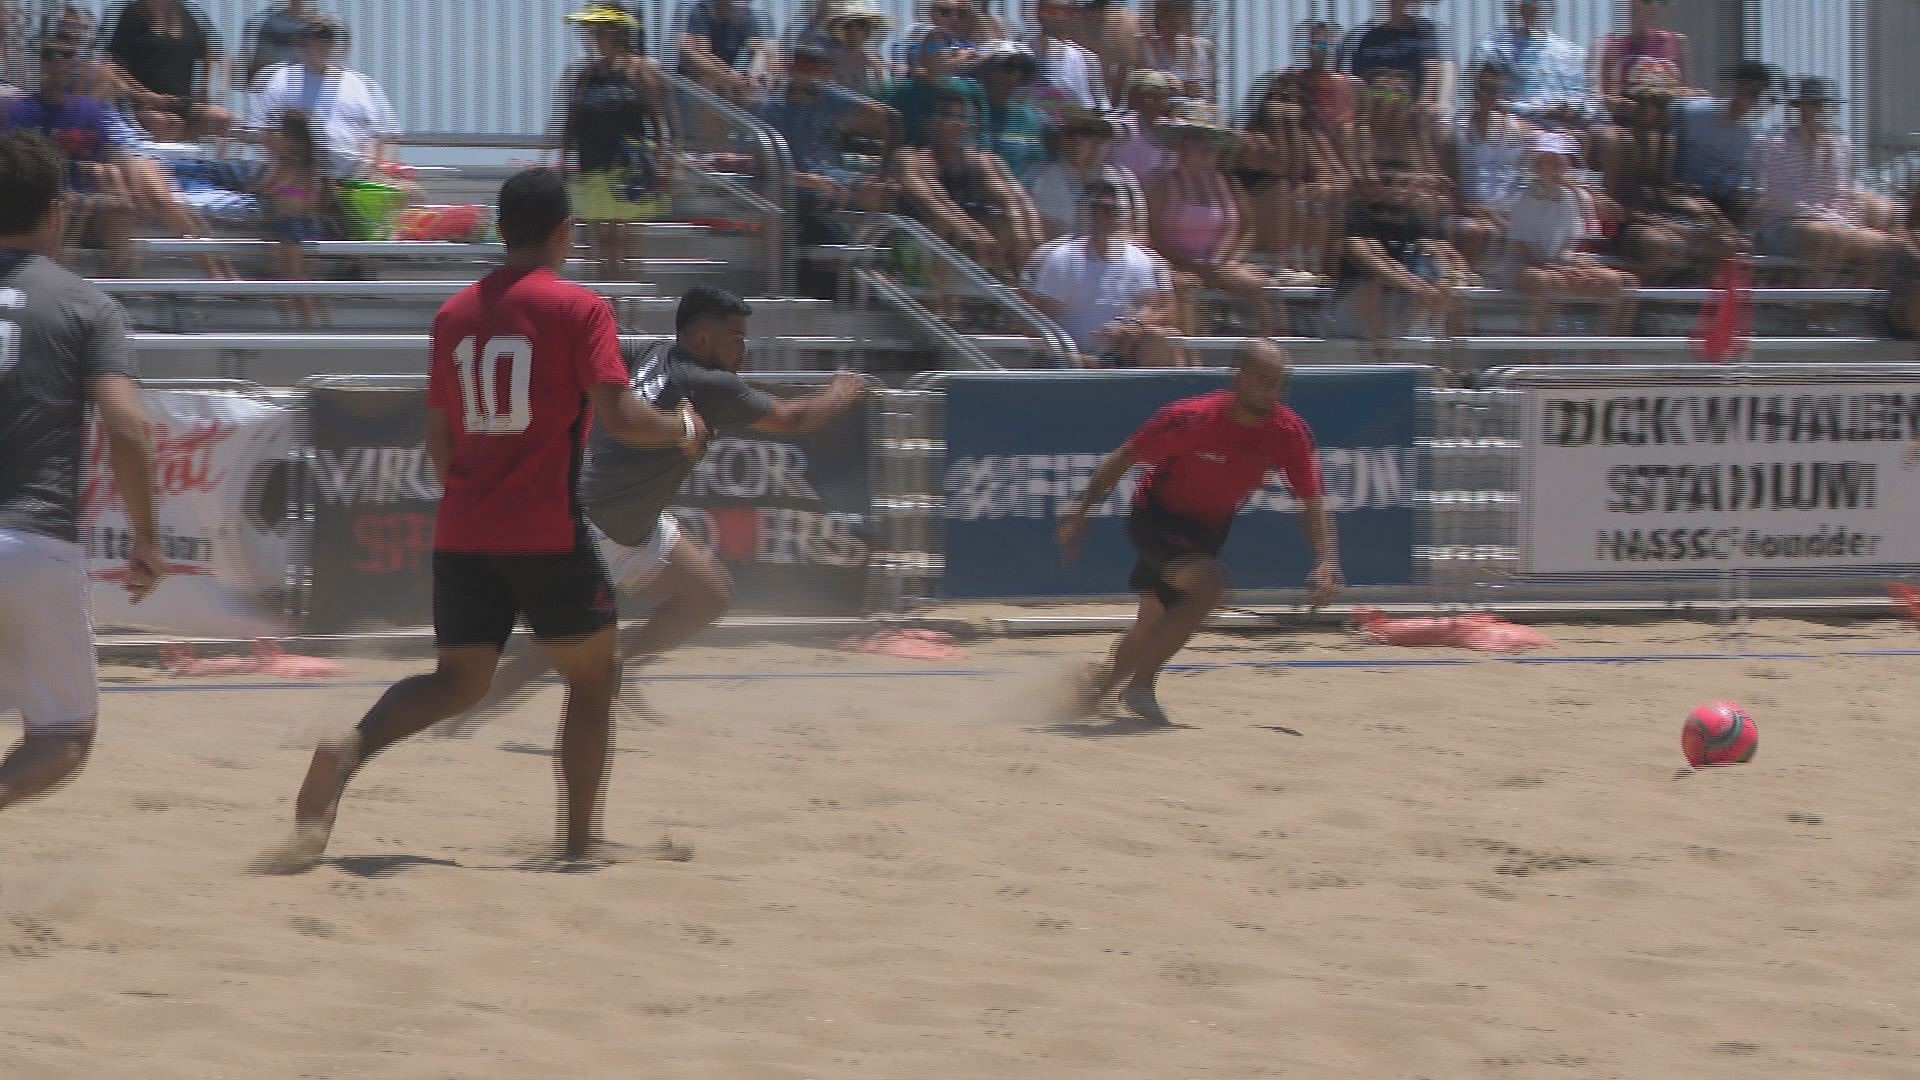 Over the weekend, thousands gathered at the oceanfront as the Sand Soccer Championships resumed in Virginia Beach.